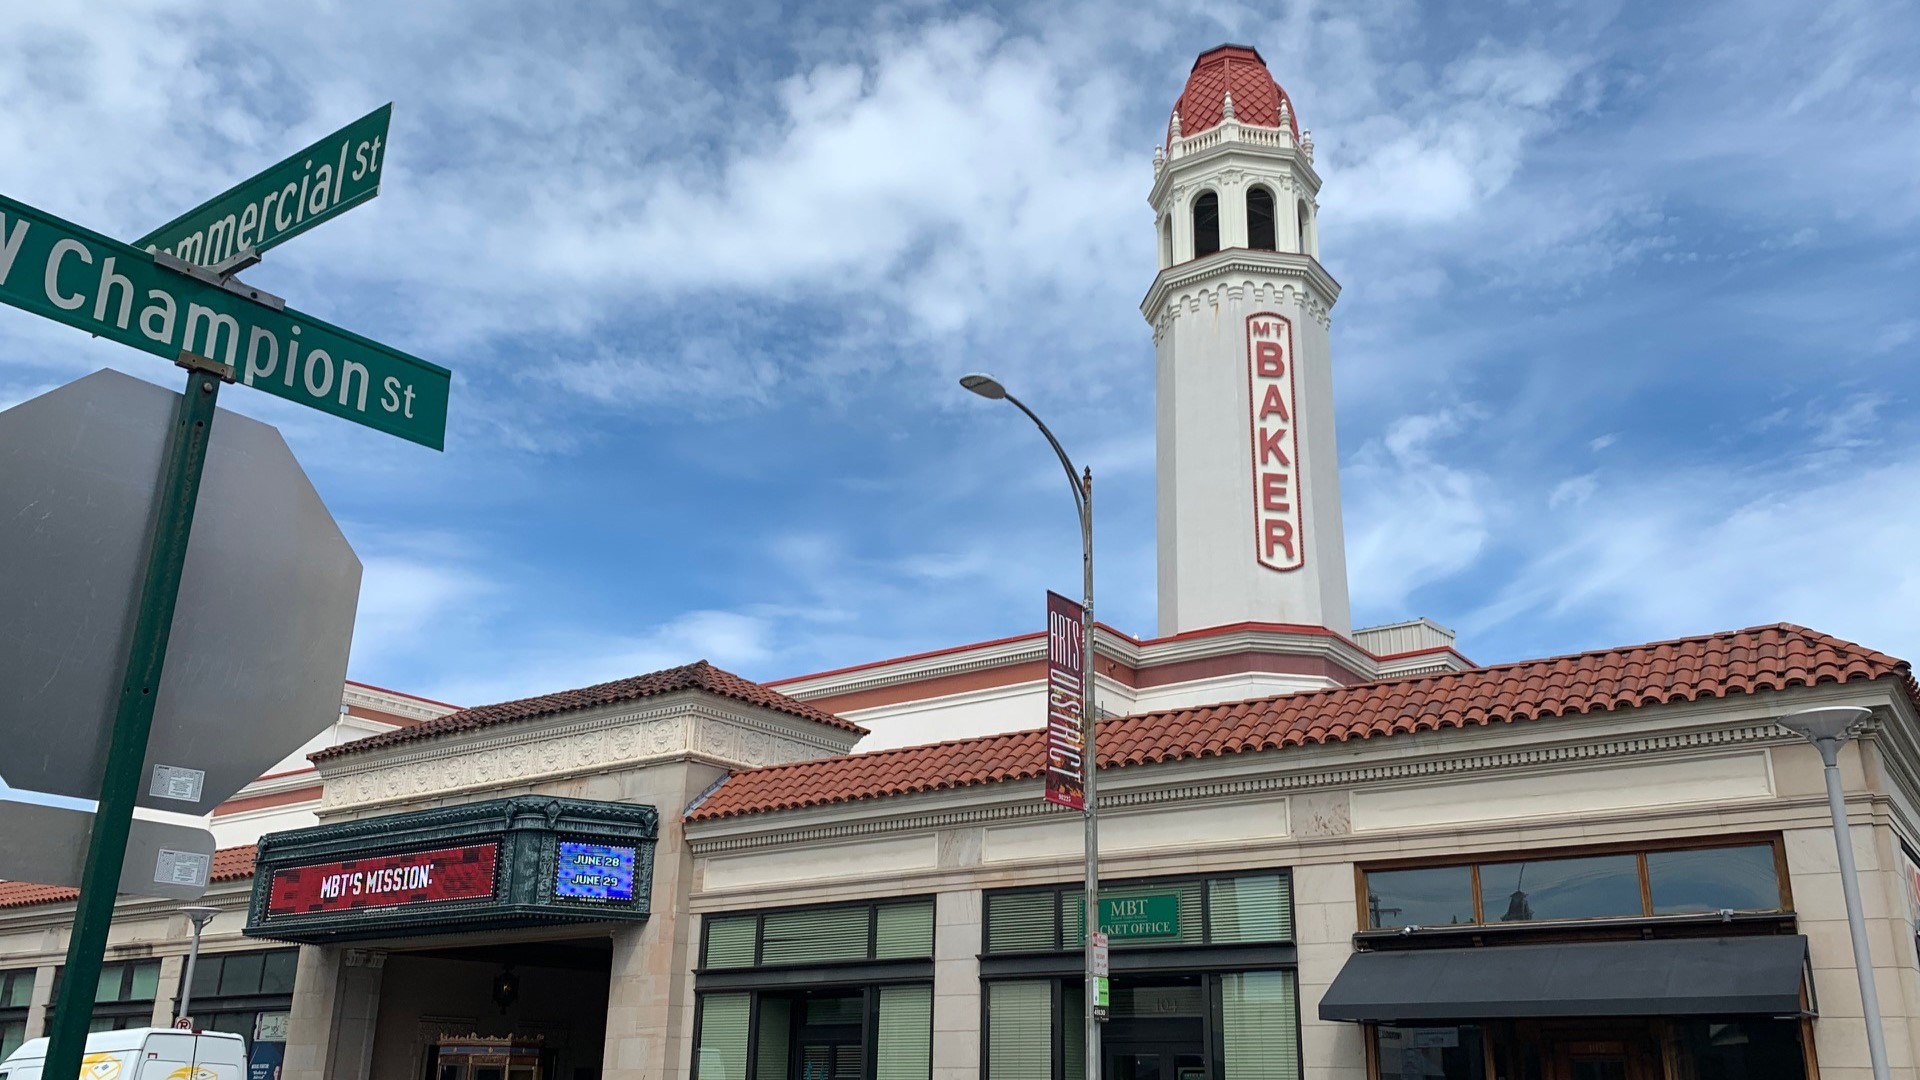 Historic theaters! Deep-dish pizza! Bellingham may seem small, but there's so much more to see in this city. Sponsored by Windermere Real Estate.